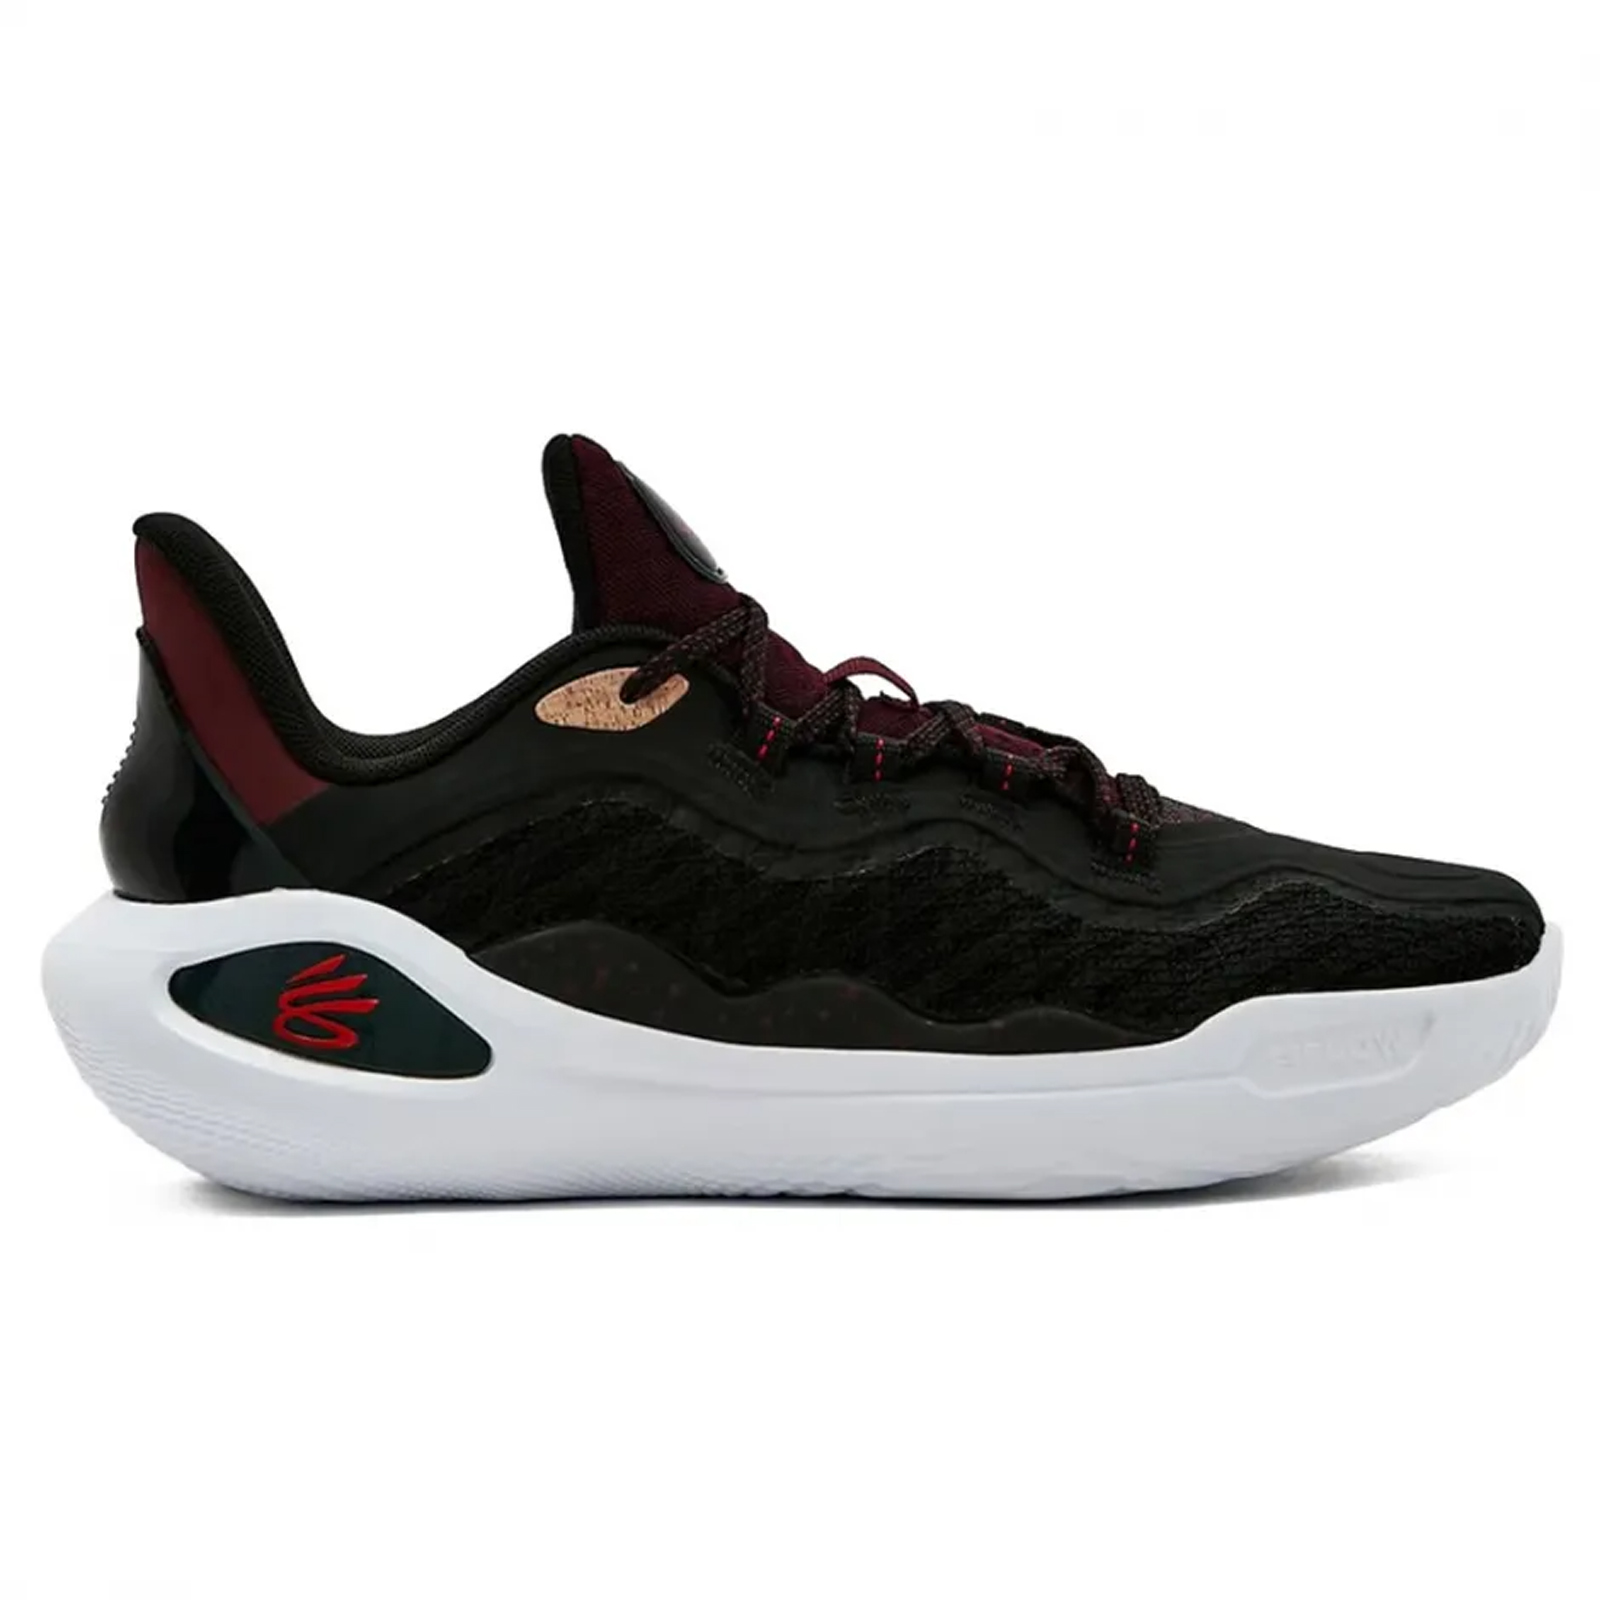 Under Armour - 3026616 CURRY 11 DC - Black/Jet Gray/Red Ανδρικά > Παπούτσια > Αθλητικά > Παπούτσι Mid Cut